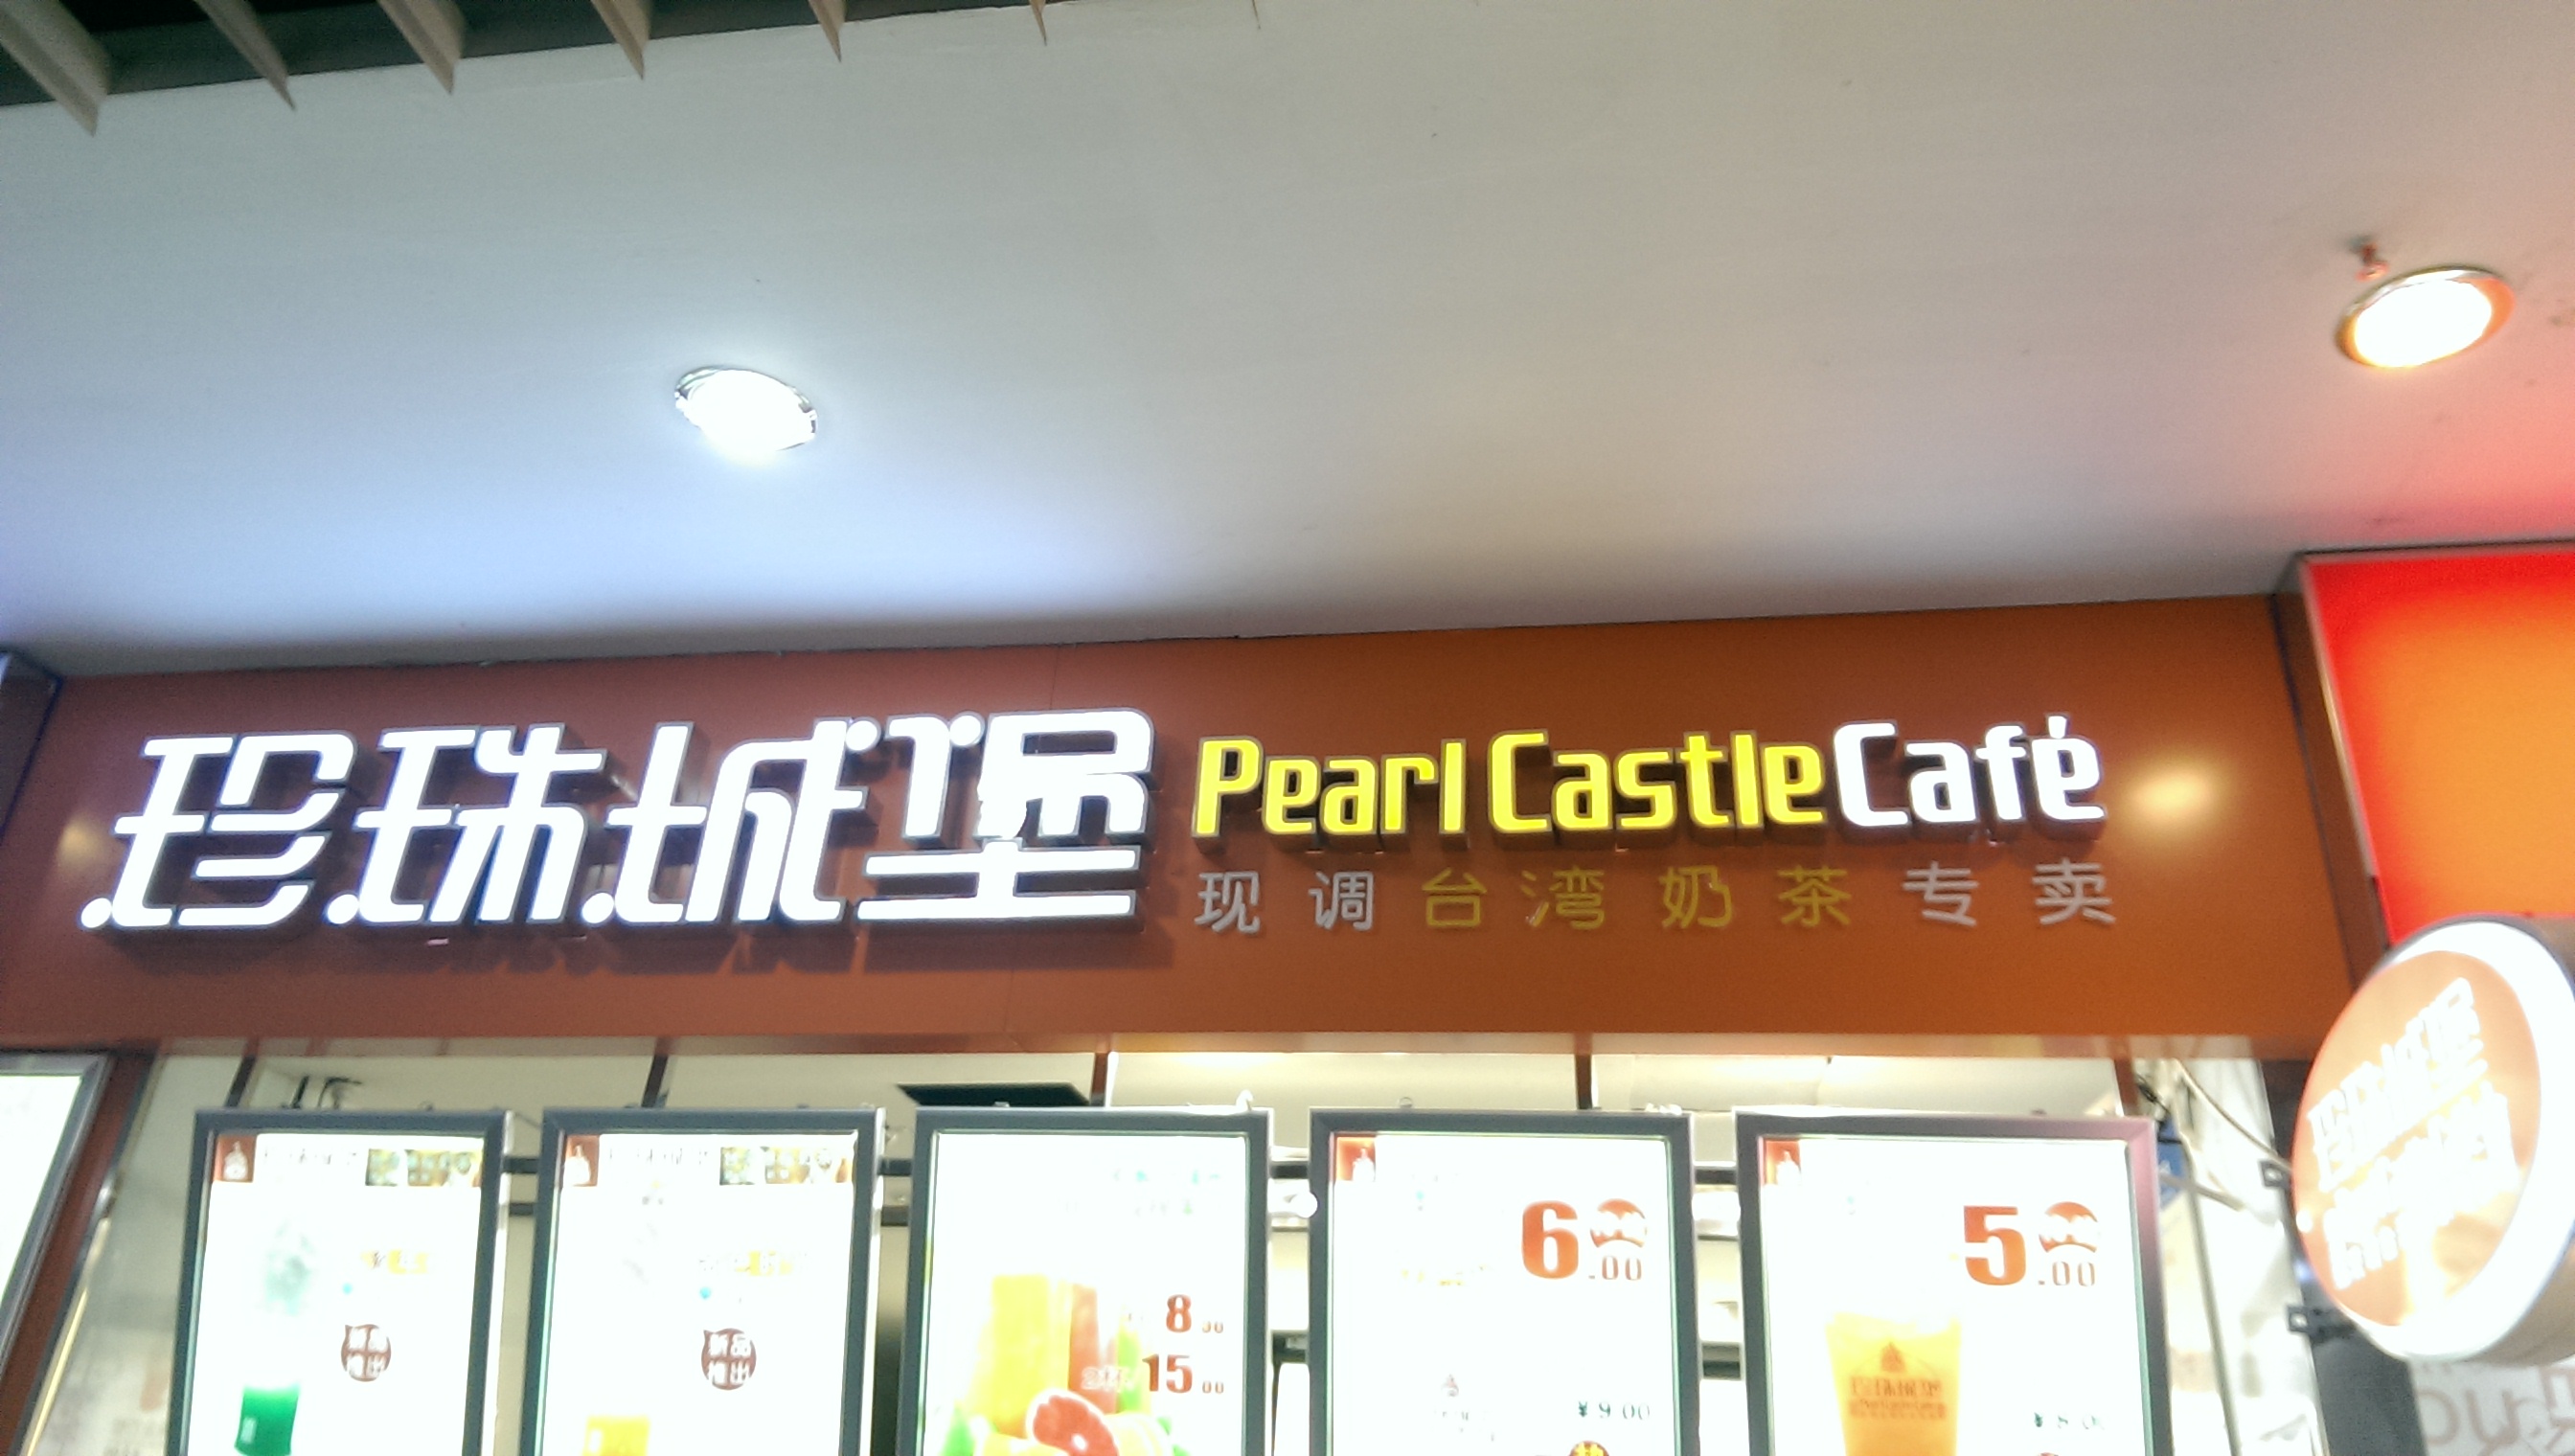 [Pearl Castle Cafe]